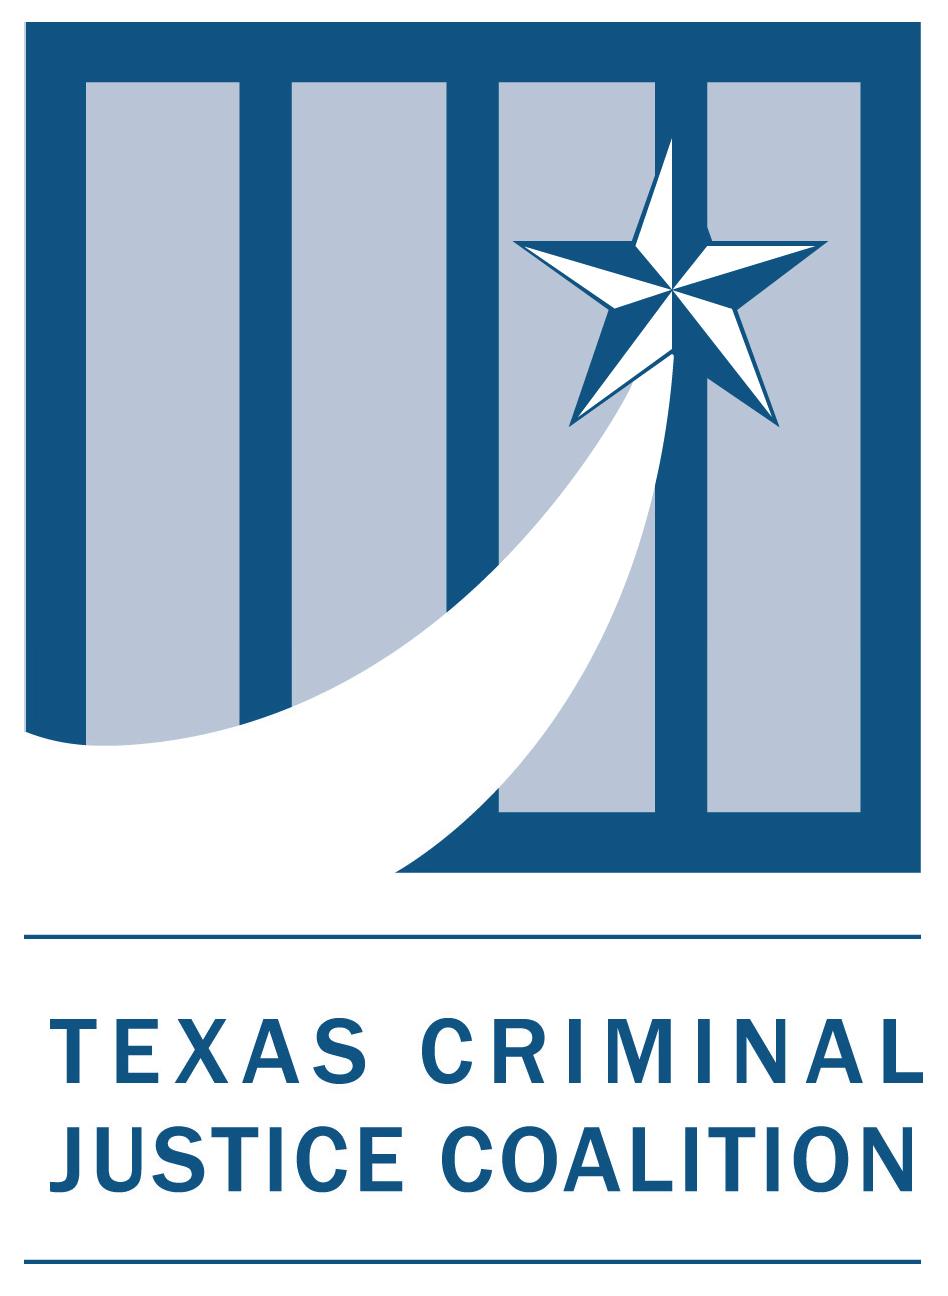 WRITTEN TESTIMONY SUBMITTED BY DOUGLAS SMITH, MSSW TEXAS CRIMINAL JUSTICE COALITION ON THE TEXAS DEPARTMENT OF CRIMINAL